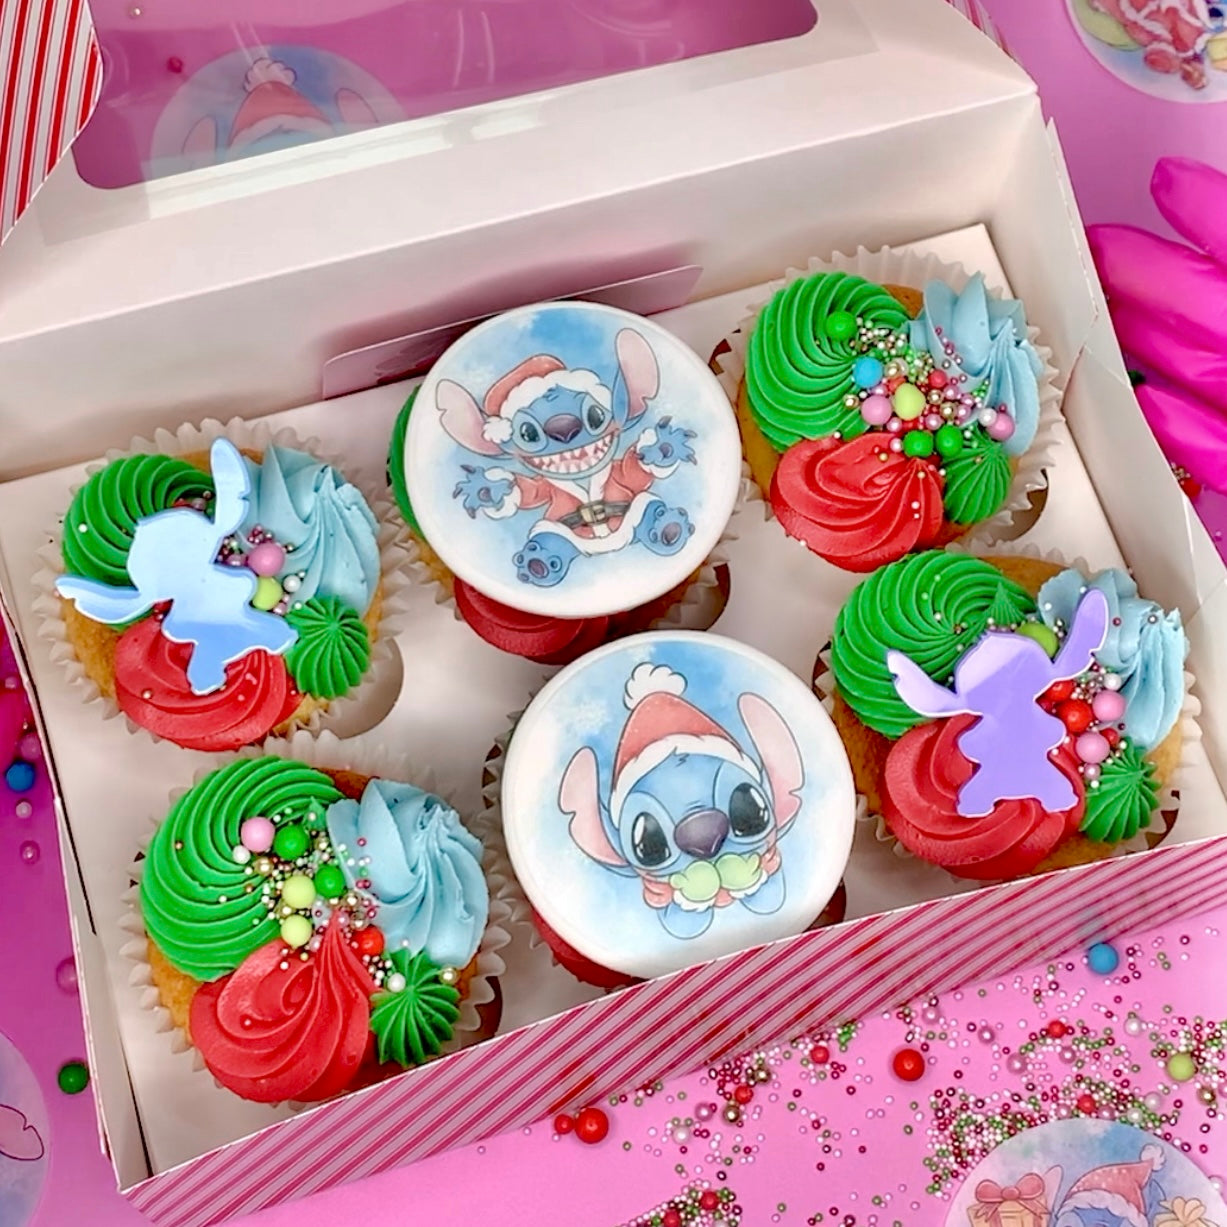 EDIBLE TOPPERS - STITCH CHRISTMAS